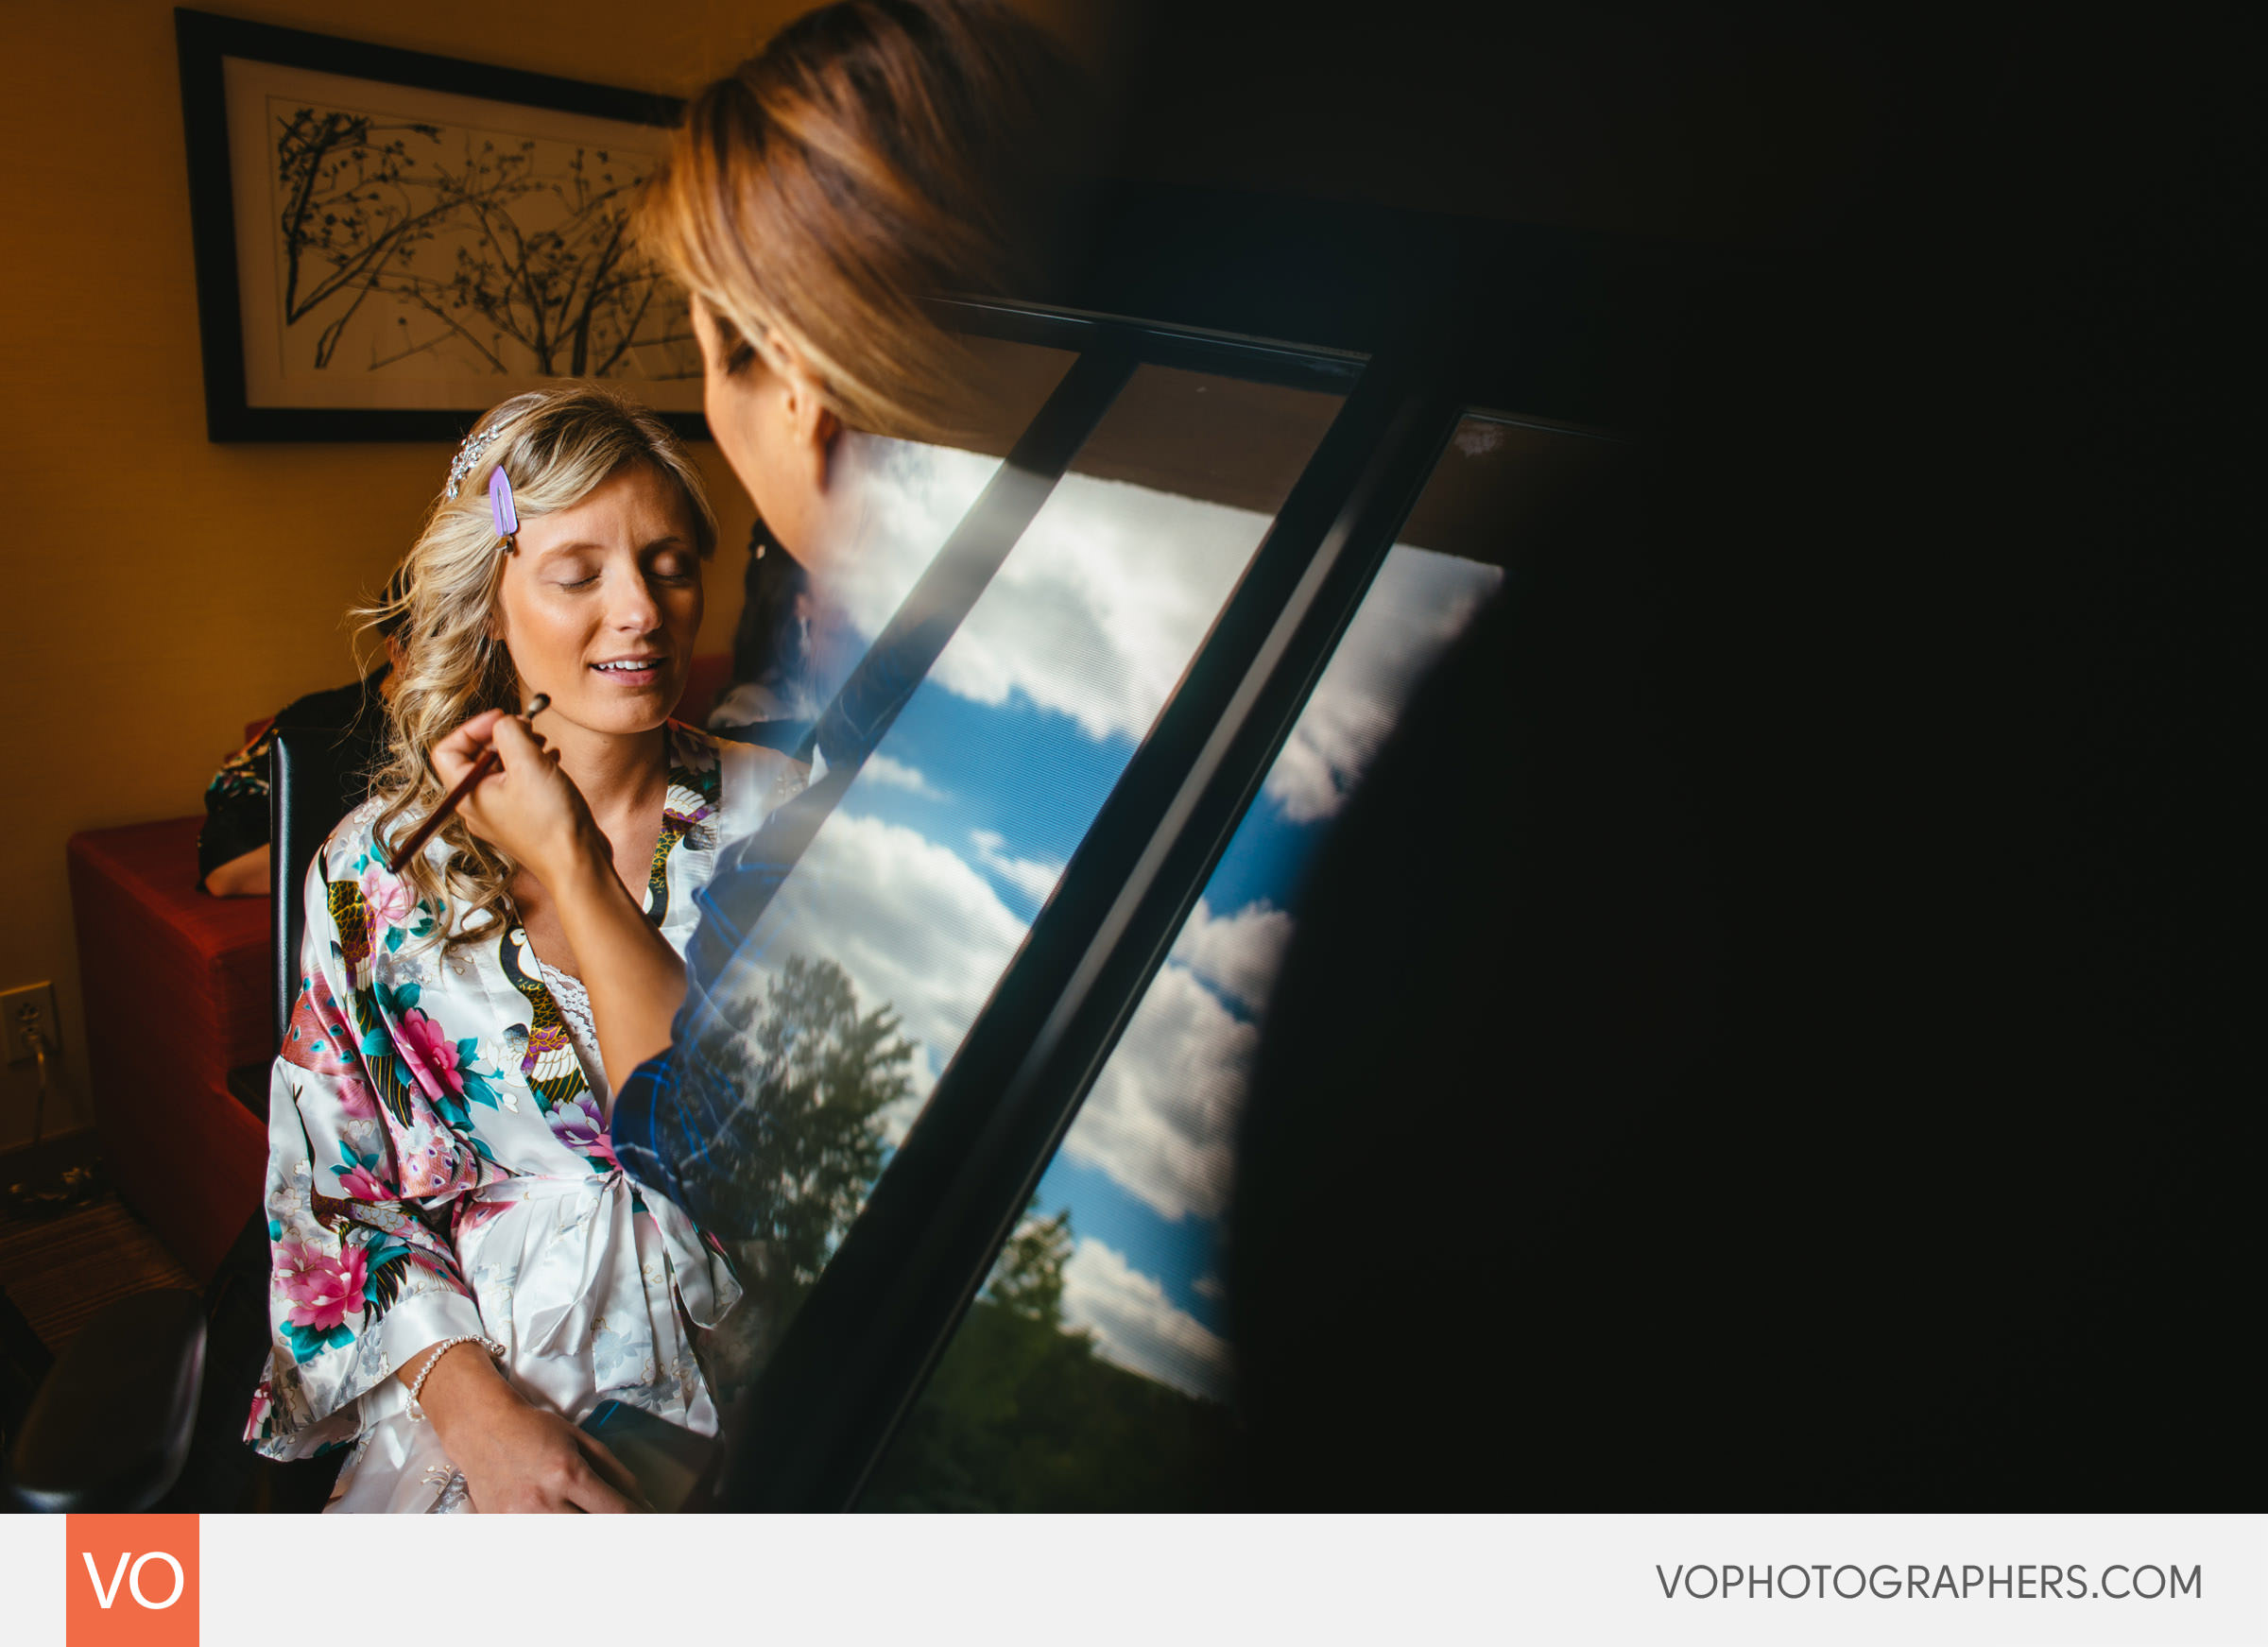 Bride getting her makeup done. Window Reflection